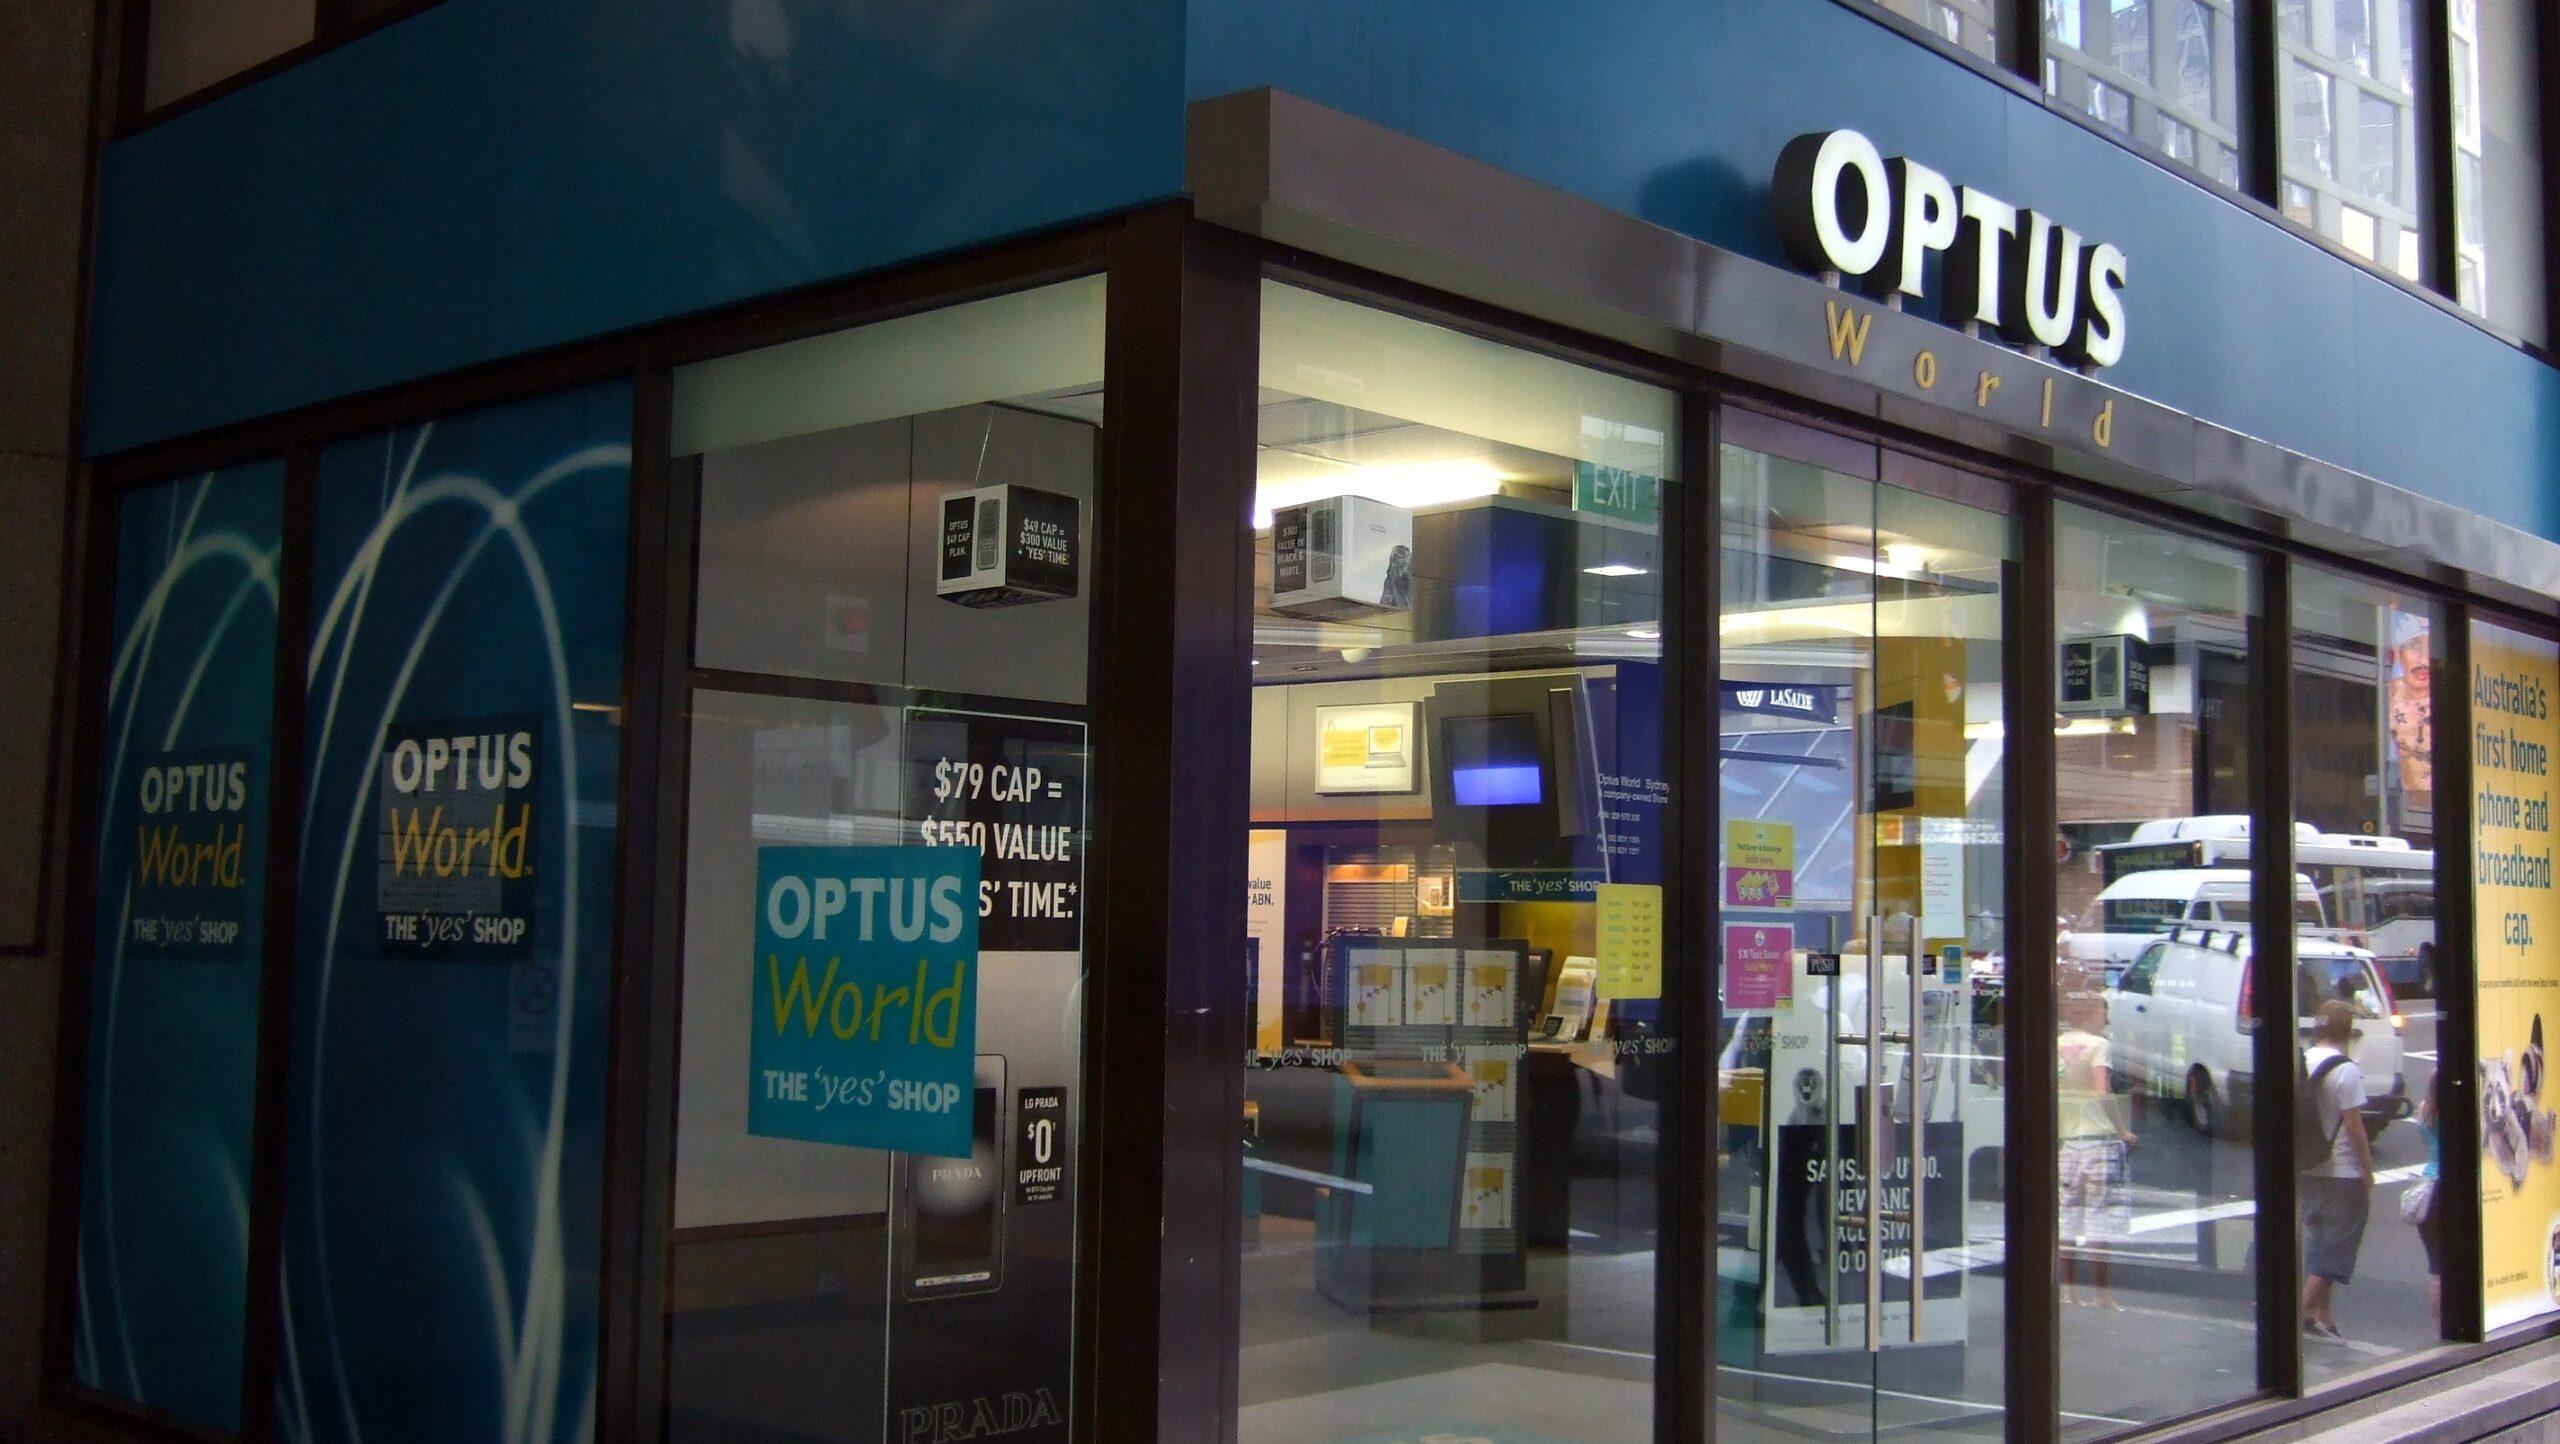 An Optus World store in Sydney.